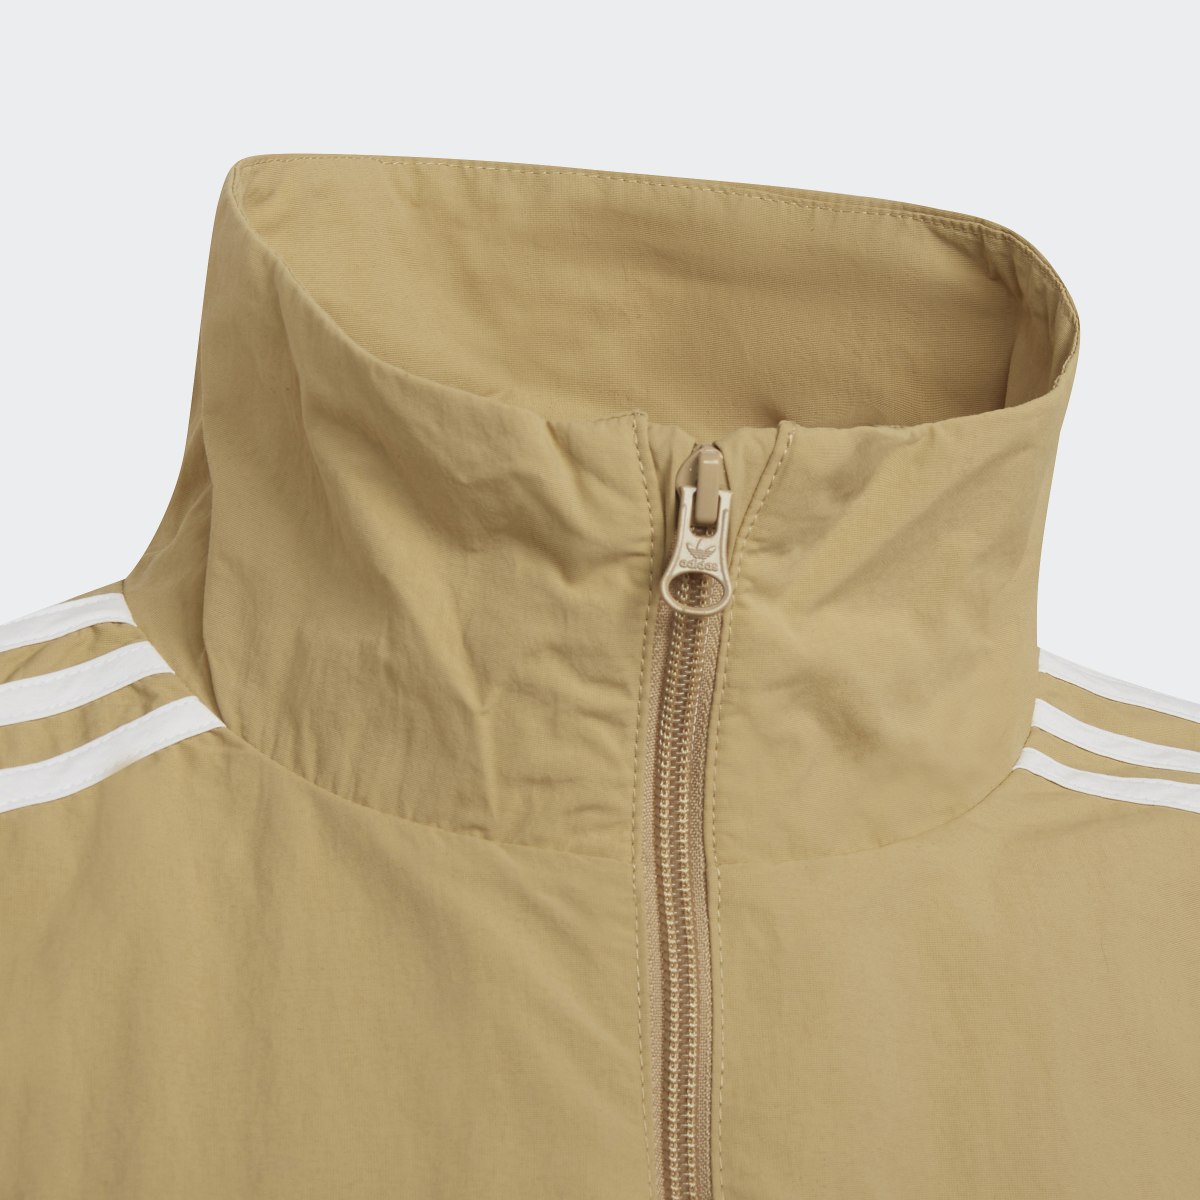 Adidas Woven Track Top. 5